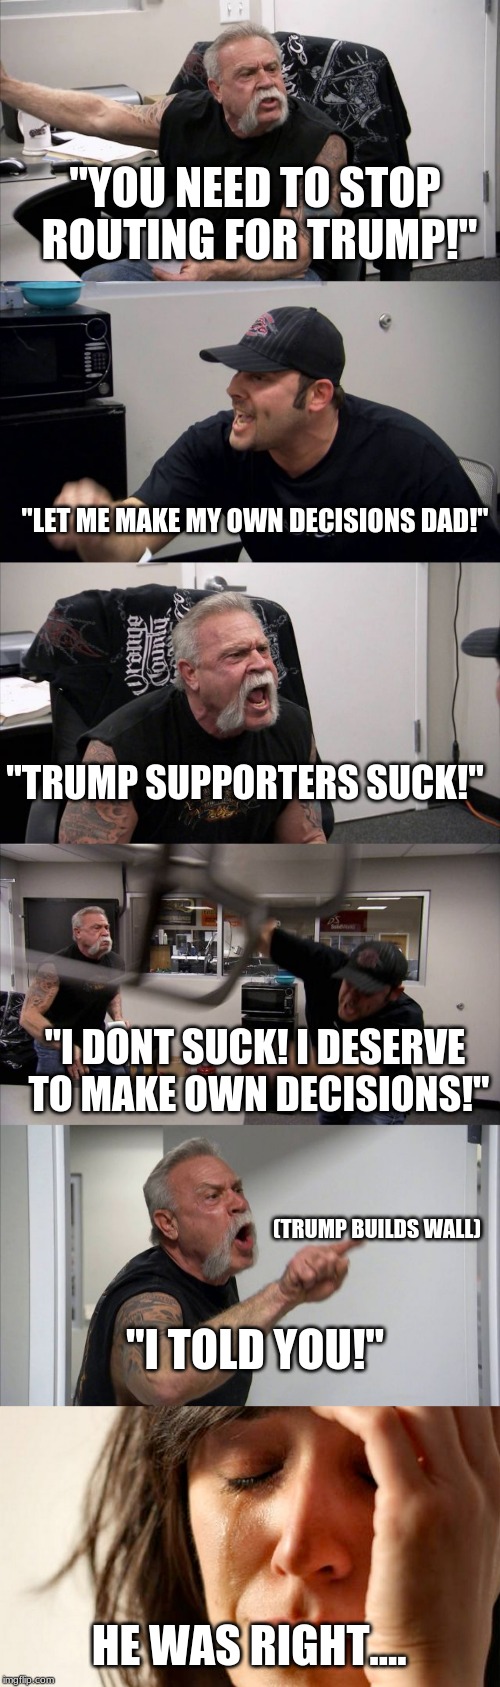 "YOU NEED TO STOP ROUTING FOR TRUMP!"; "LET ME MAKE MY OWN DECISIONS DAD!"; "TRUMP SUPPORTERS SUCK!"; "I DONT SUCK! I DESERVE TO MAKE OWN DECISIONS!"; (TRUMP BUILDS WALL); "I TOLD YOU!"; HE WAS RIGHT.... | image tagged in memes,american chopper argument | made w/ Imgflip meme maker